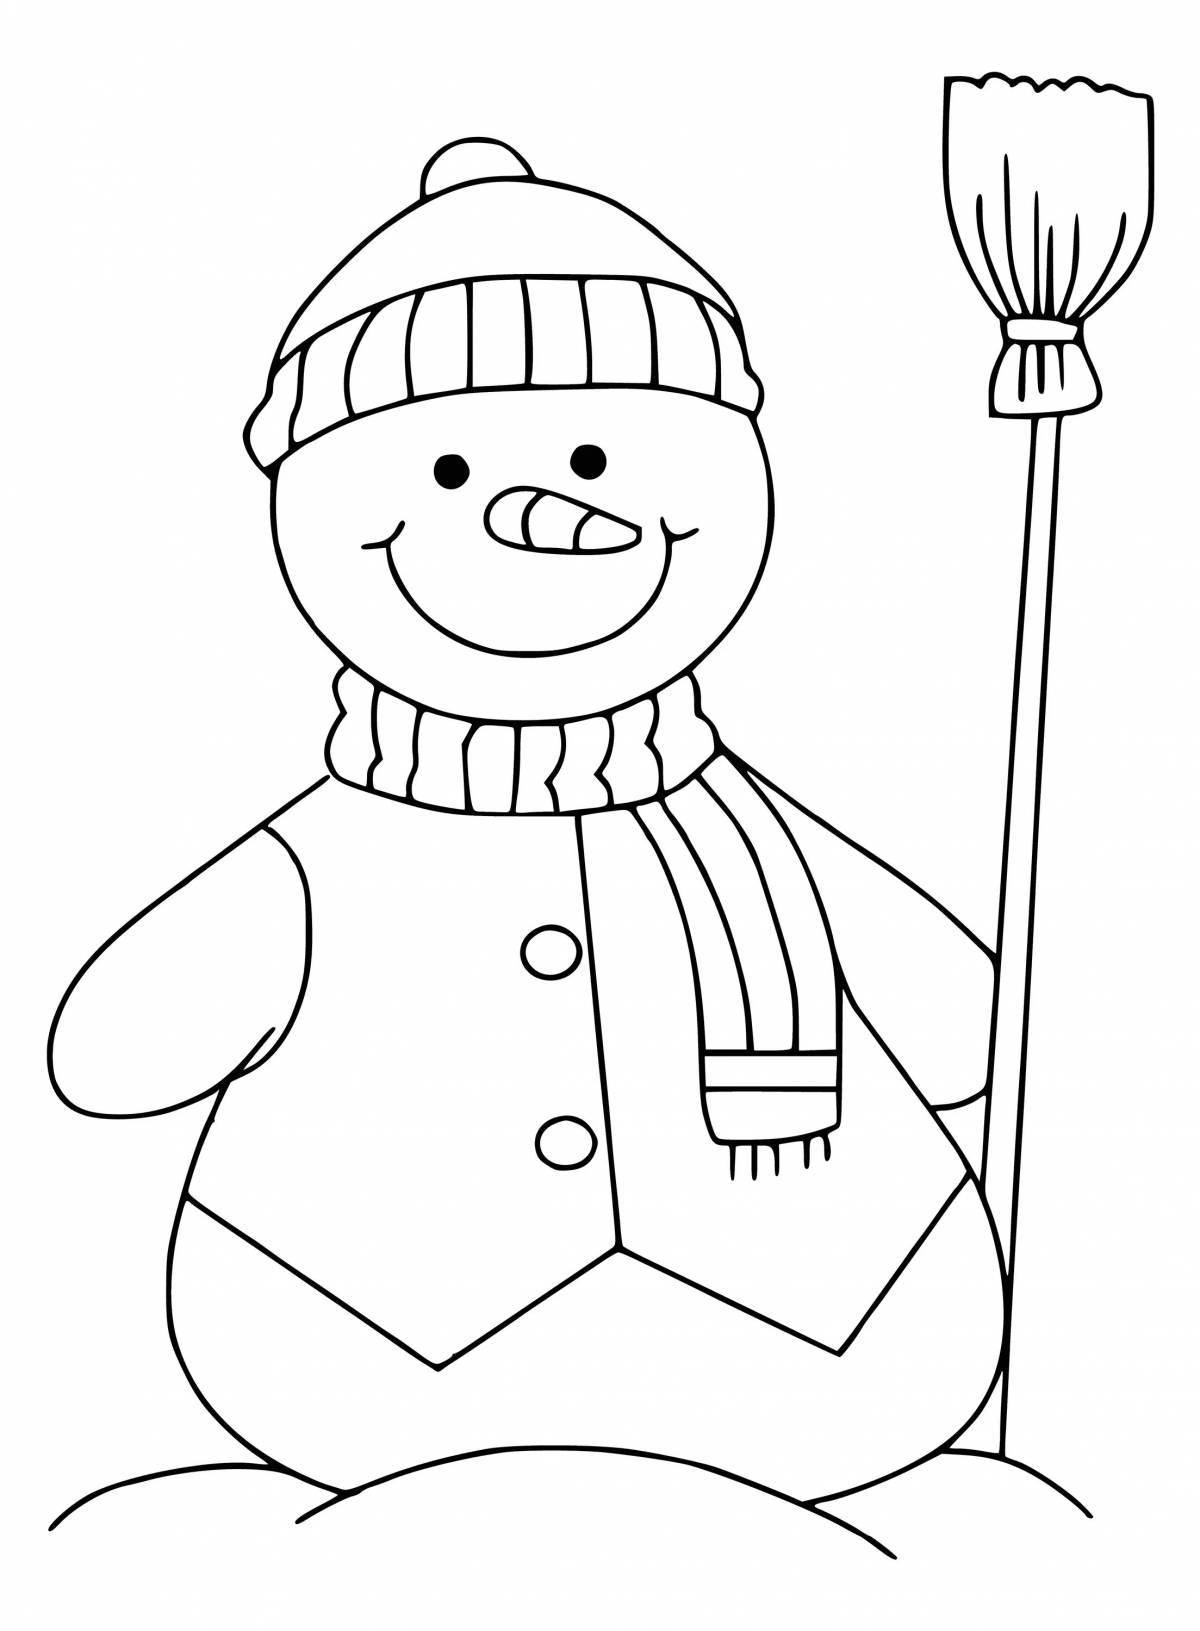 Cute snowman with broom coloring page